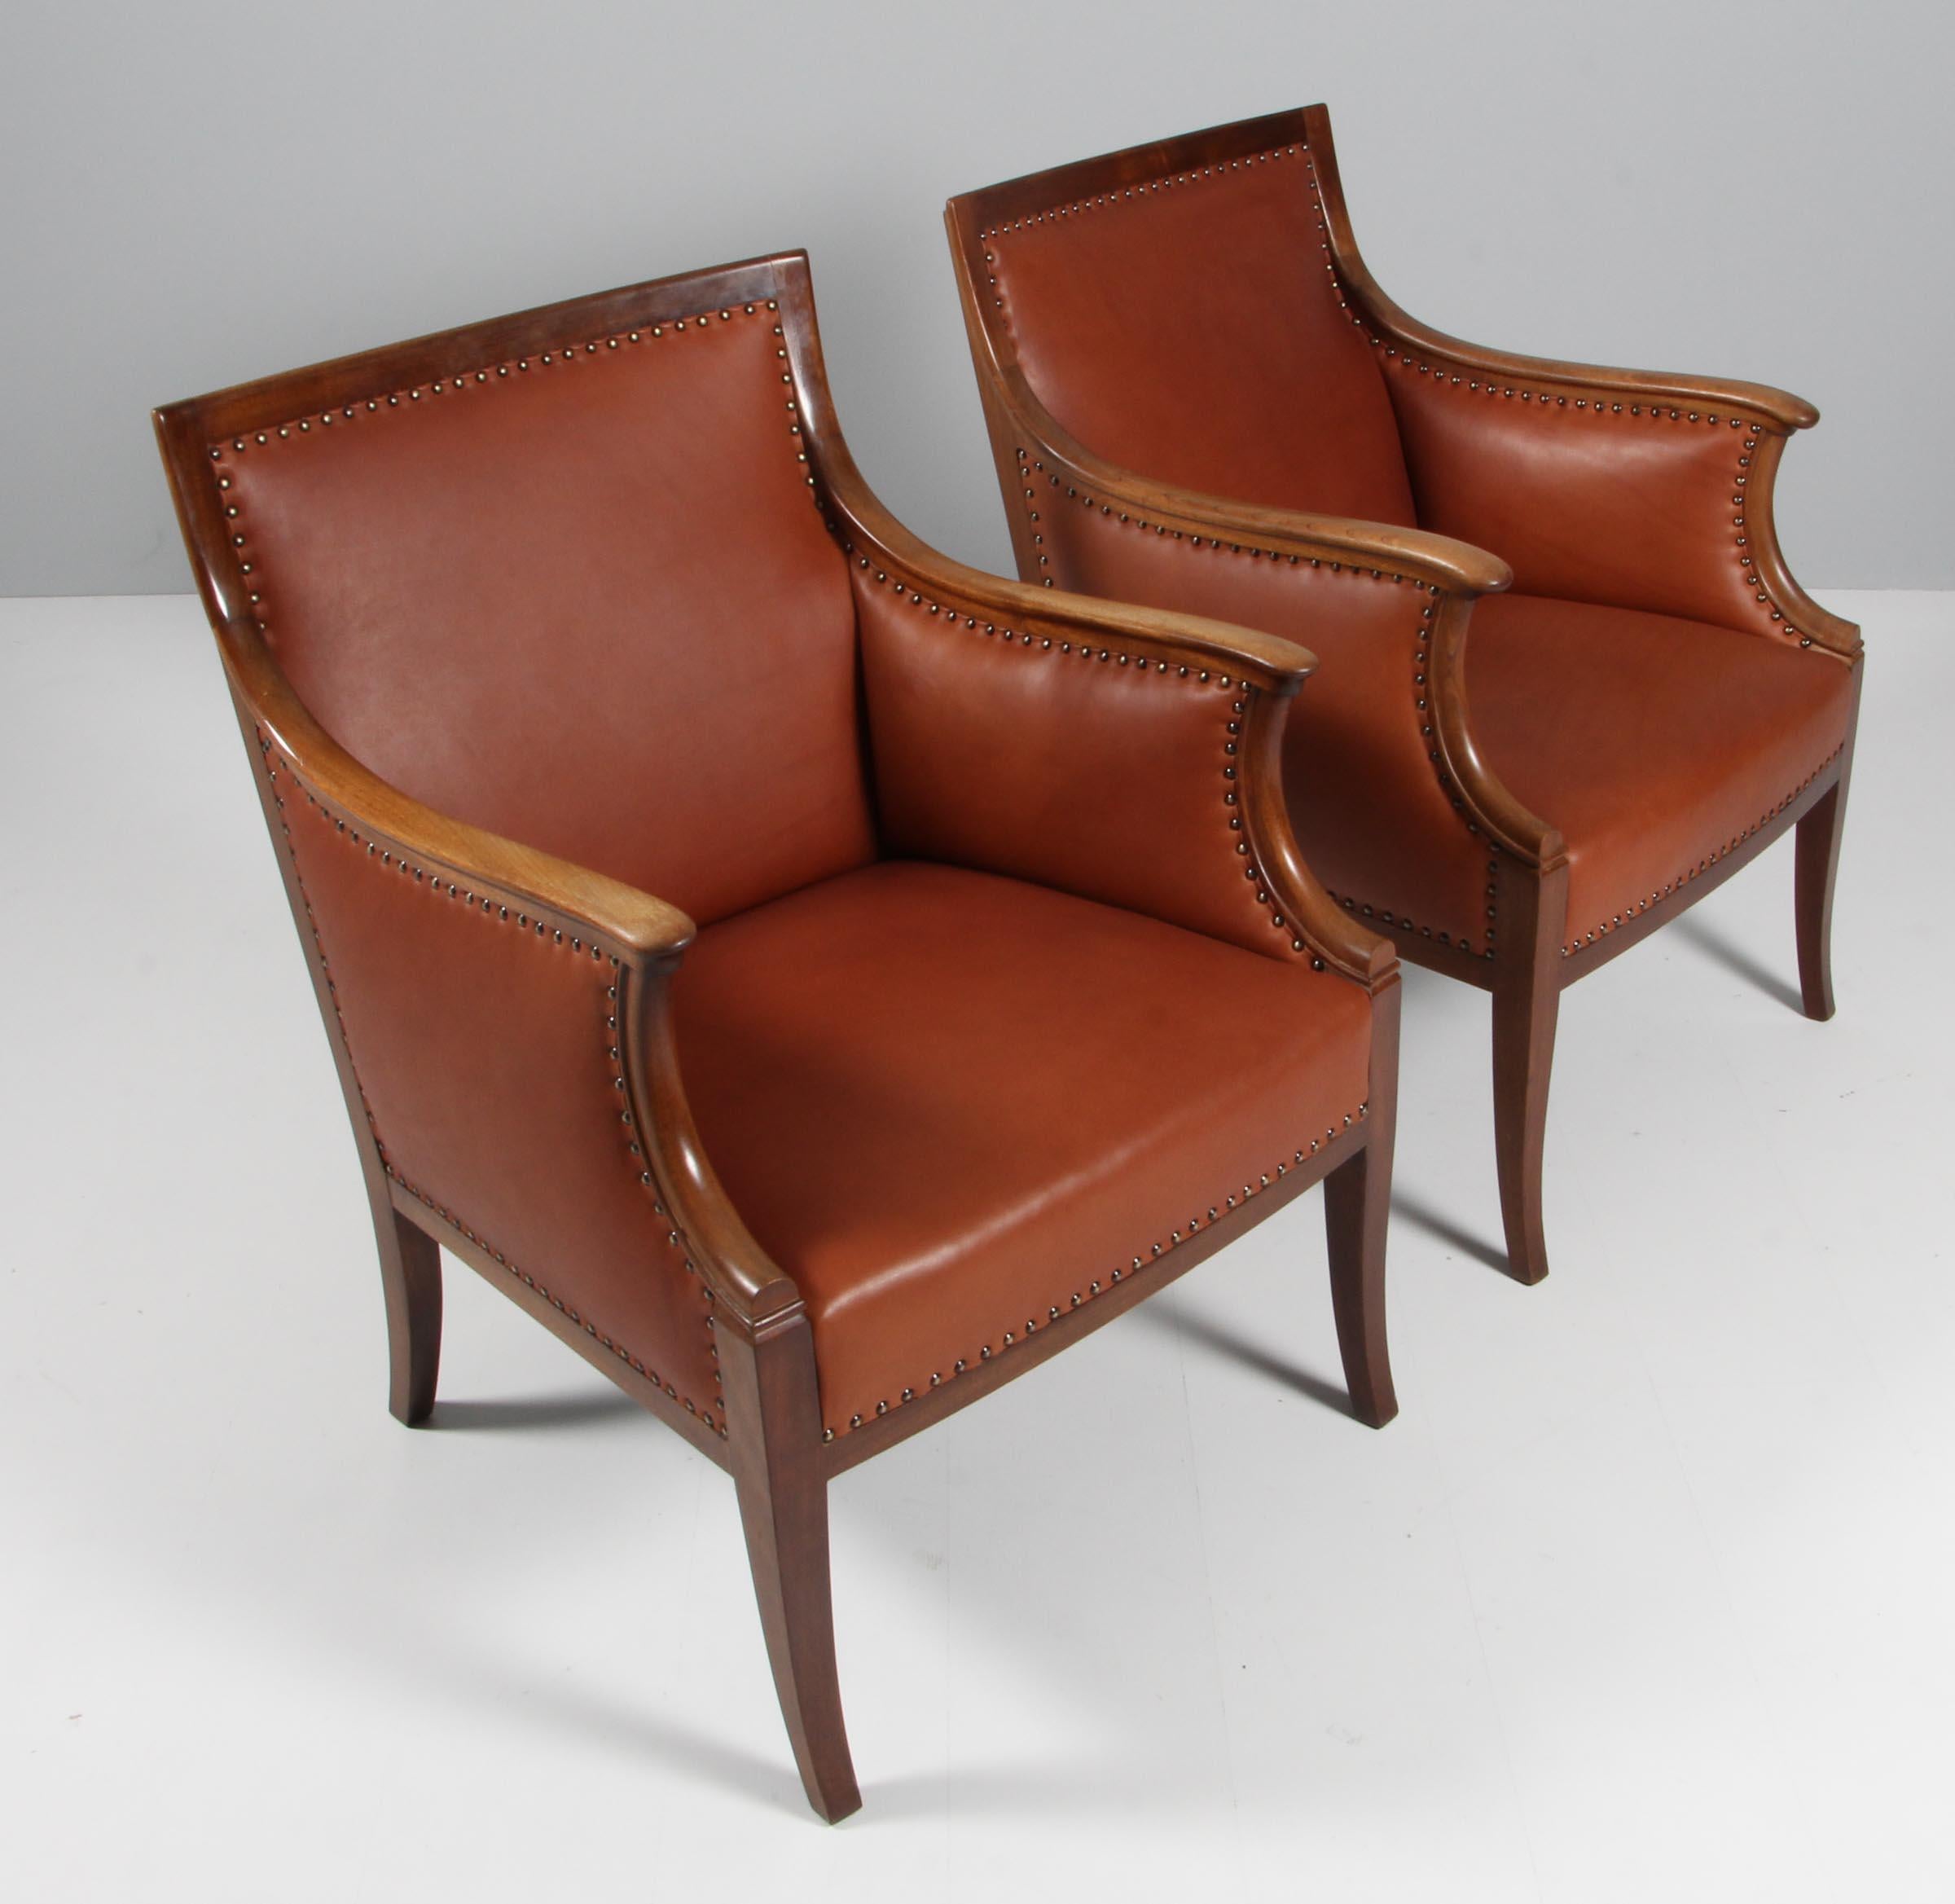 Frits Henningsen pair of lounge chairs new upholstered with brandy coloured aniline leather.

Frame of mahogany. 

Made in the 1940s.